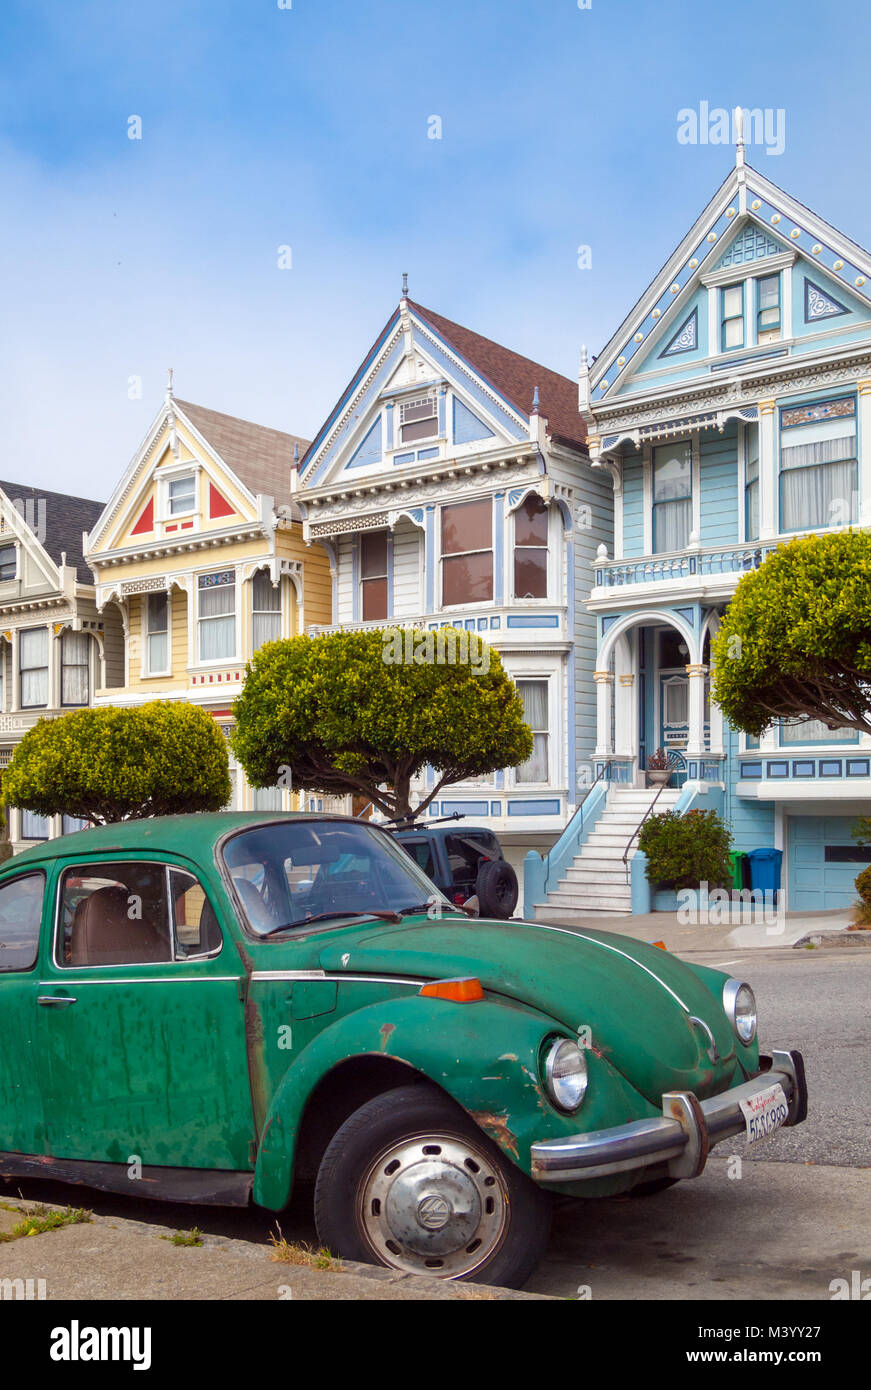 A green Volkswagen Beetle parked in front of the 'Painted Ladies' row of Victorian Houses on Steiner Street (at Alamo Square) in San Francisco. Stock Photo